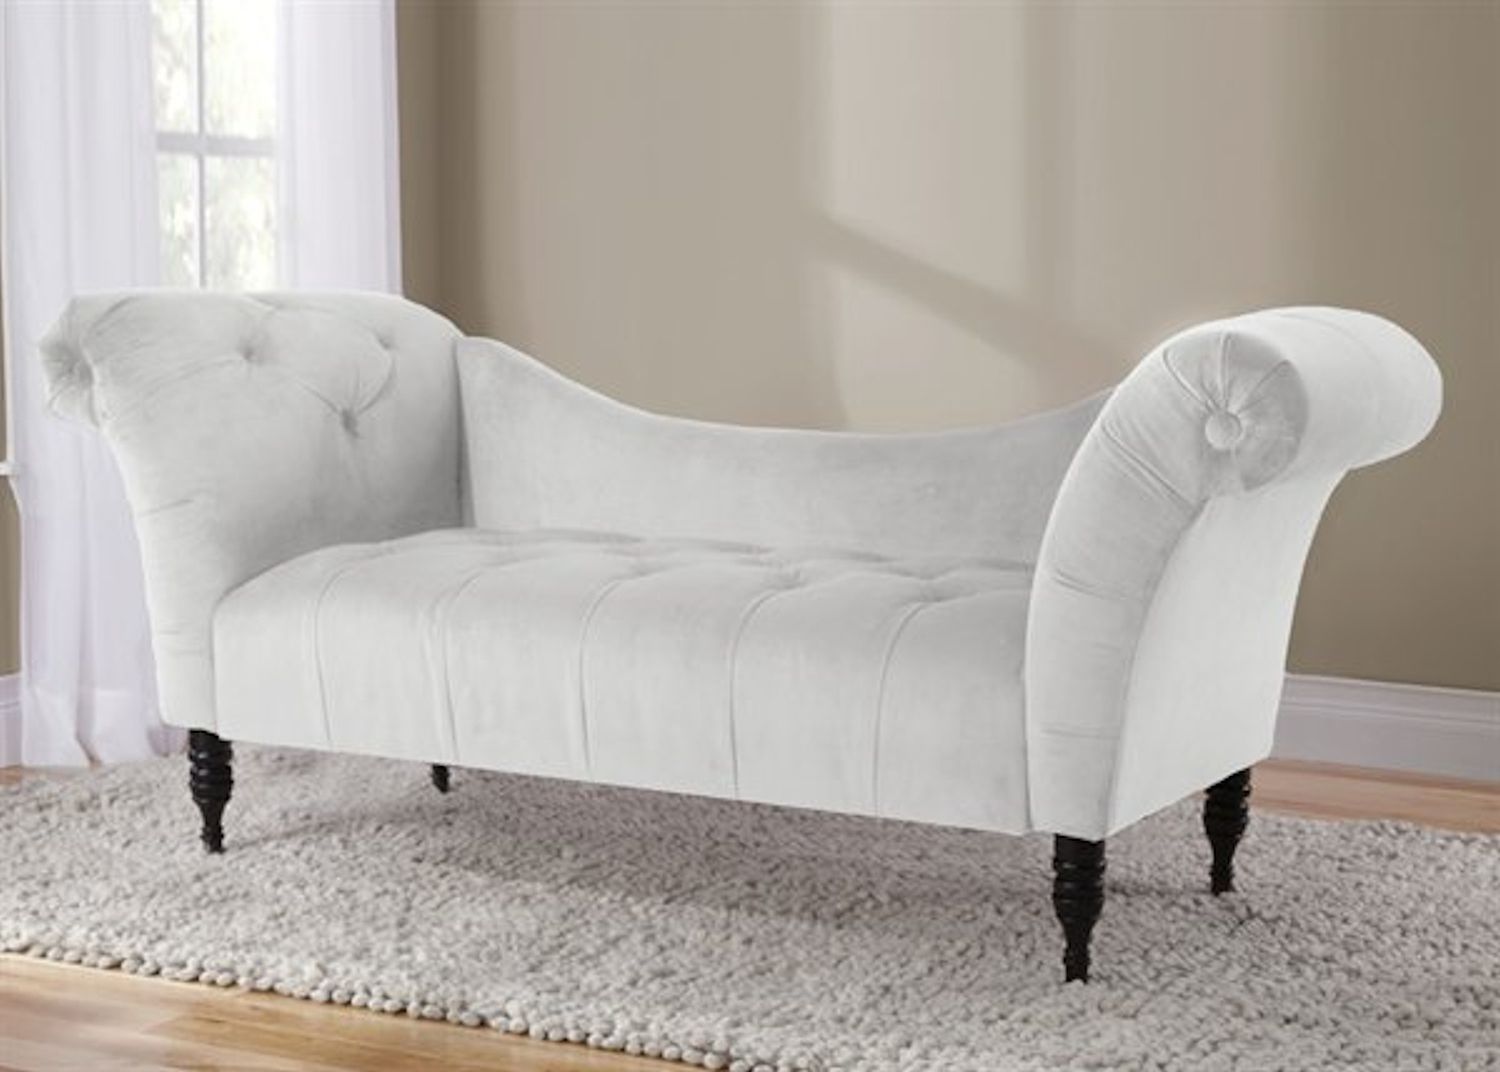 Skyline Chaise Lounges Inside Well Known Velvet Tufted Chaise Lounge – Whiteskyline Furniture – Home (View 12 of 15)